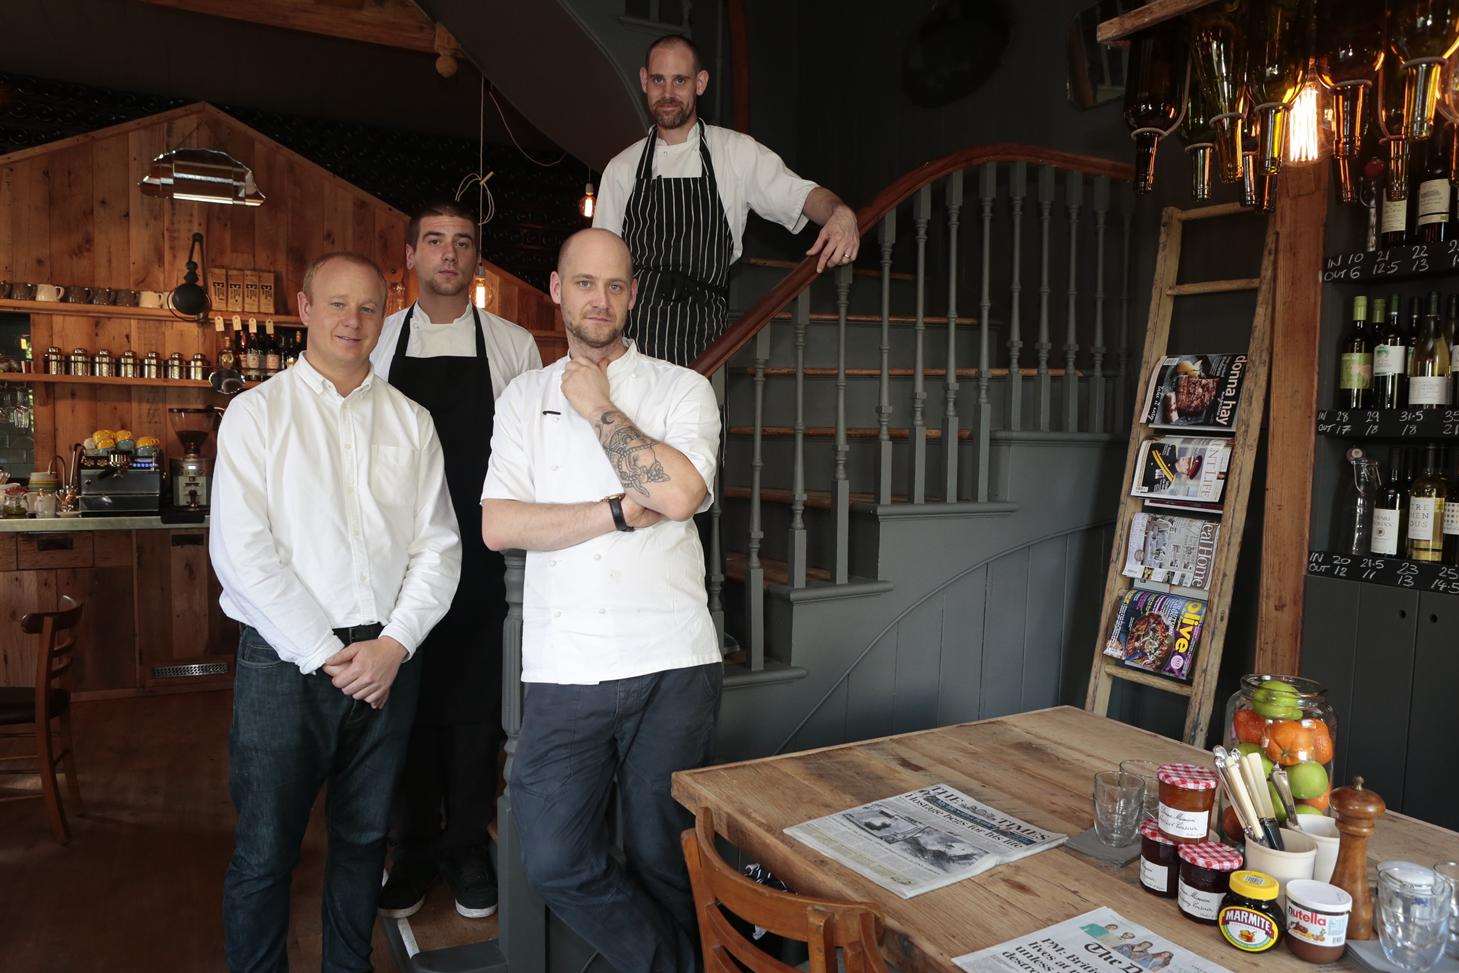 Scott Goss who used to be head chef at The Swan in West Malling, has opened a new restaurant called The Twenty Six which sits 26 people